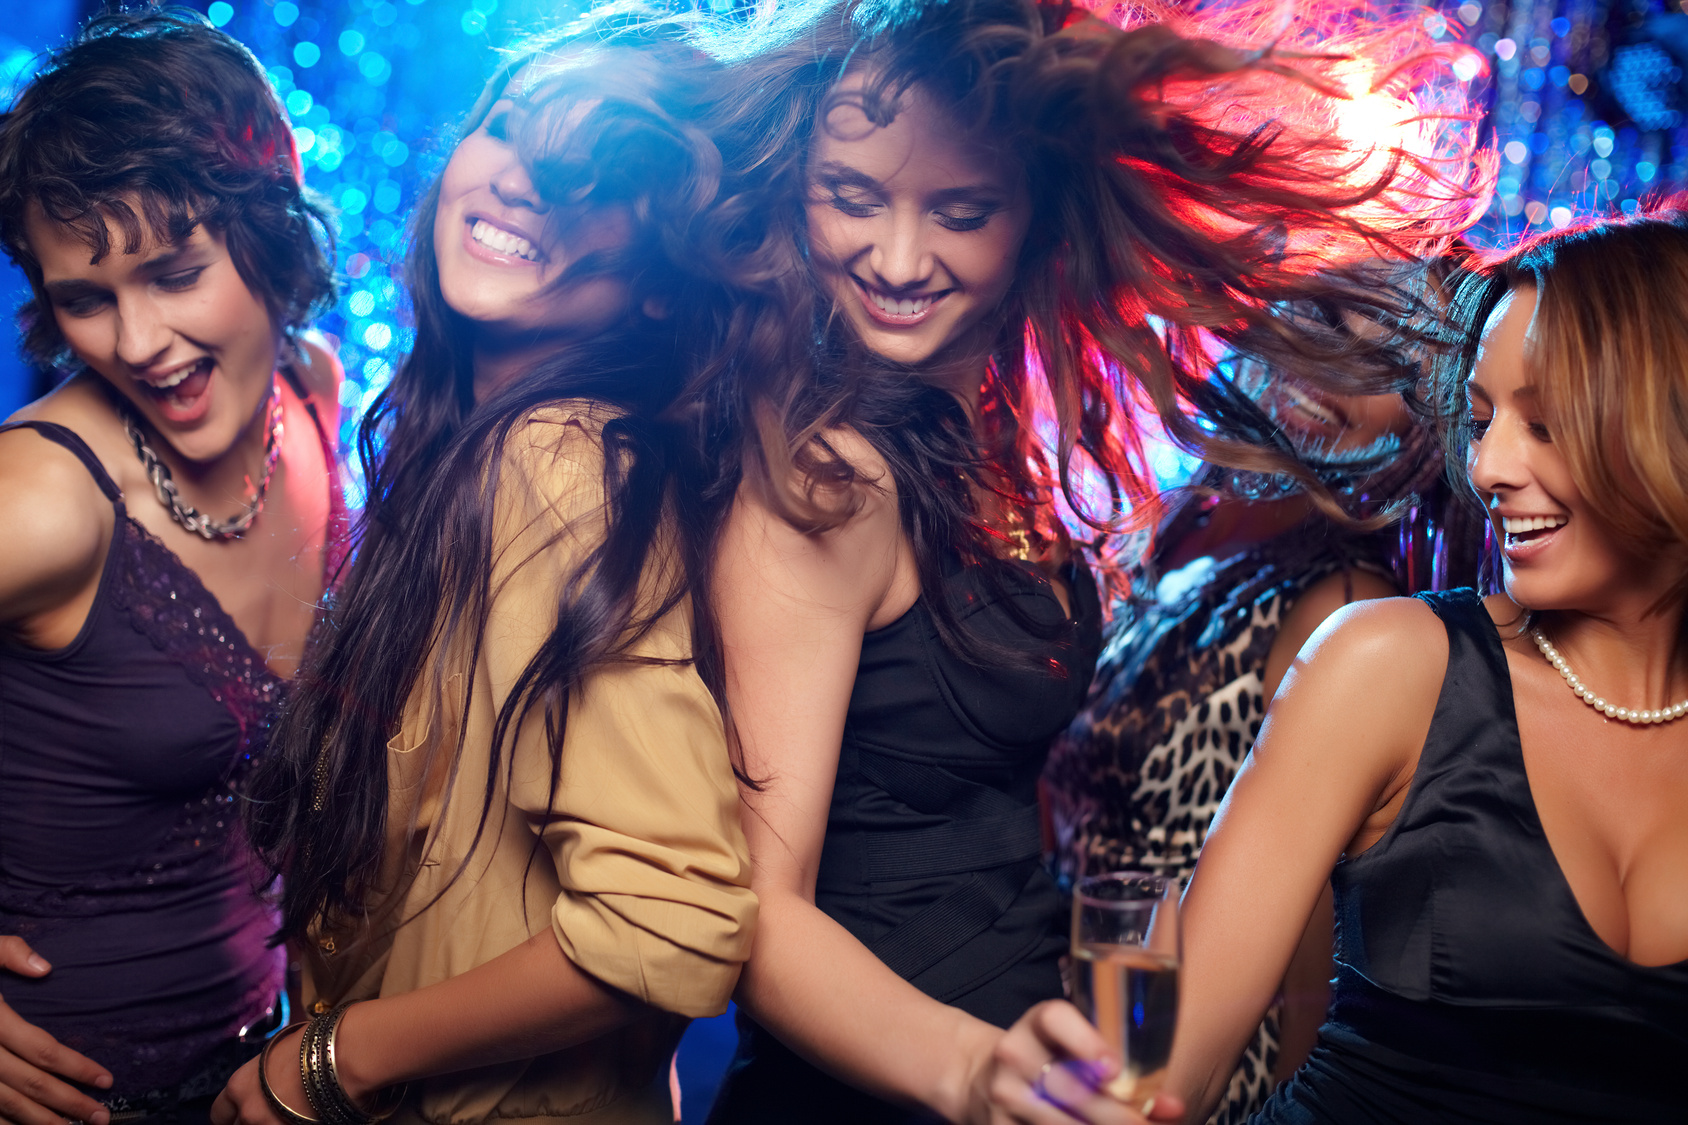 18 Reasons Why Crazy Girls Make The Best Girlfriends.